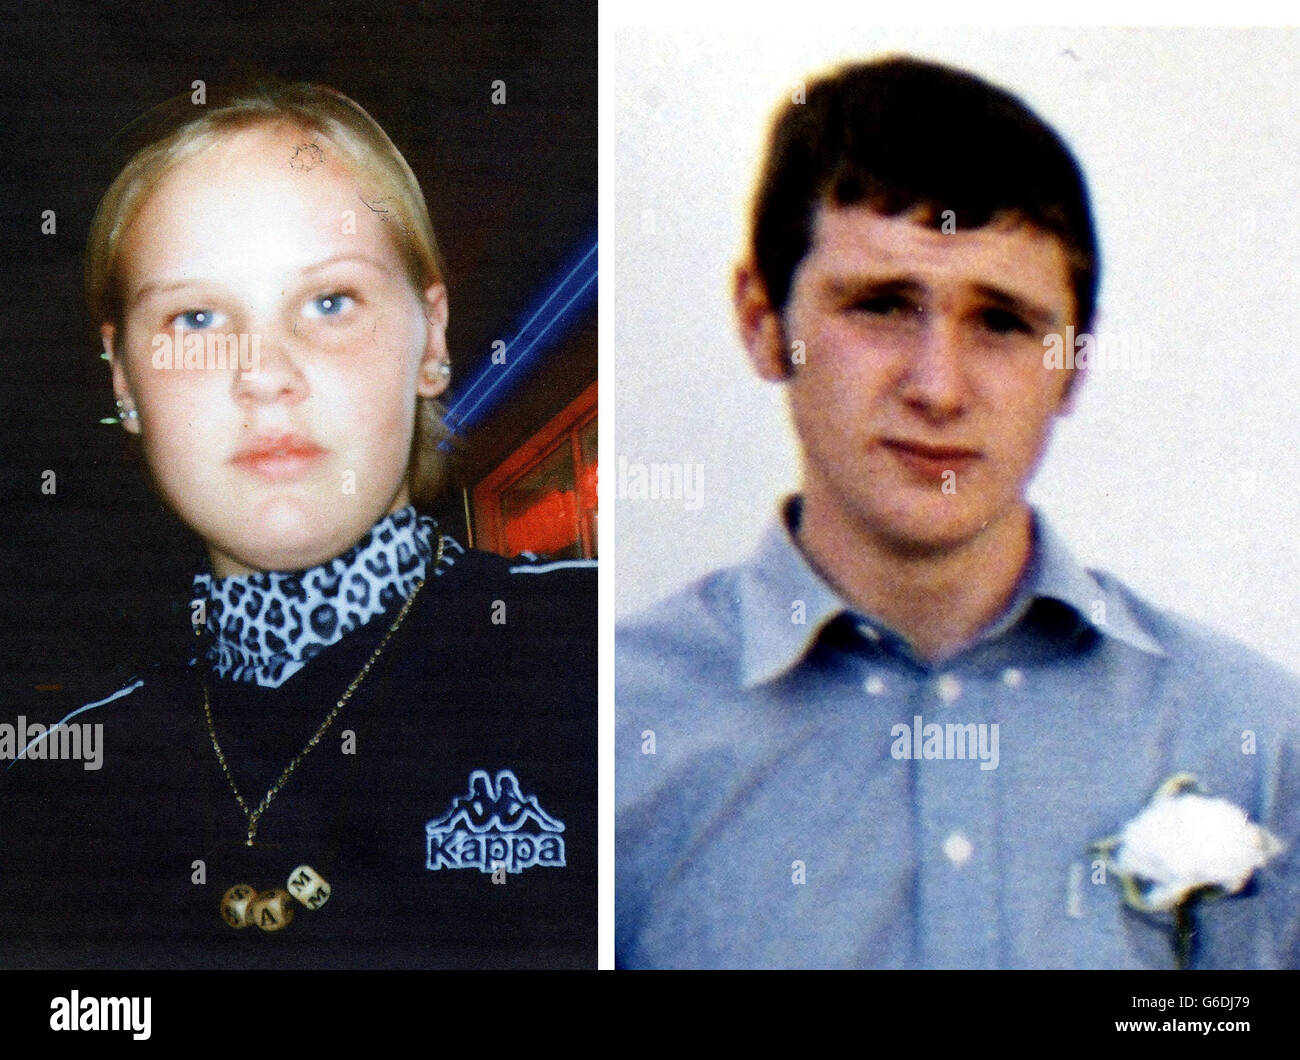 Samantha Barton and George Green, both aged 16, whose bodies were discovered on the Isle of Man in February last year. Peter Newbery, 22, is appearing in court at Douglas later, charged with their murder. * He denies the charge and the trial is expected to last between four and six weeks. 15/12/03: Peter Newbery, 23, was convicted of murdering 16-year-olds Samantha Barton and George Green. The pair had both been stabbed and strangled. The jury at the Isle of Man Courts of Justice, in Douglas, took less than three hours to reach a verdict following the six-week trial. 20/02/04: amantha Barton Stock Photo